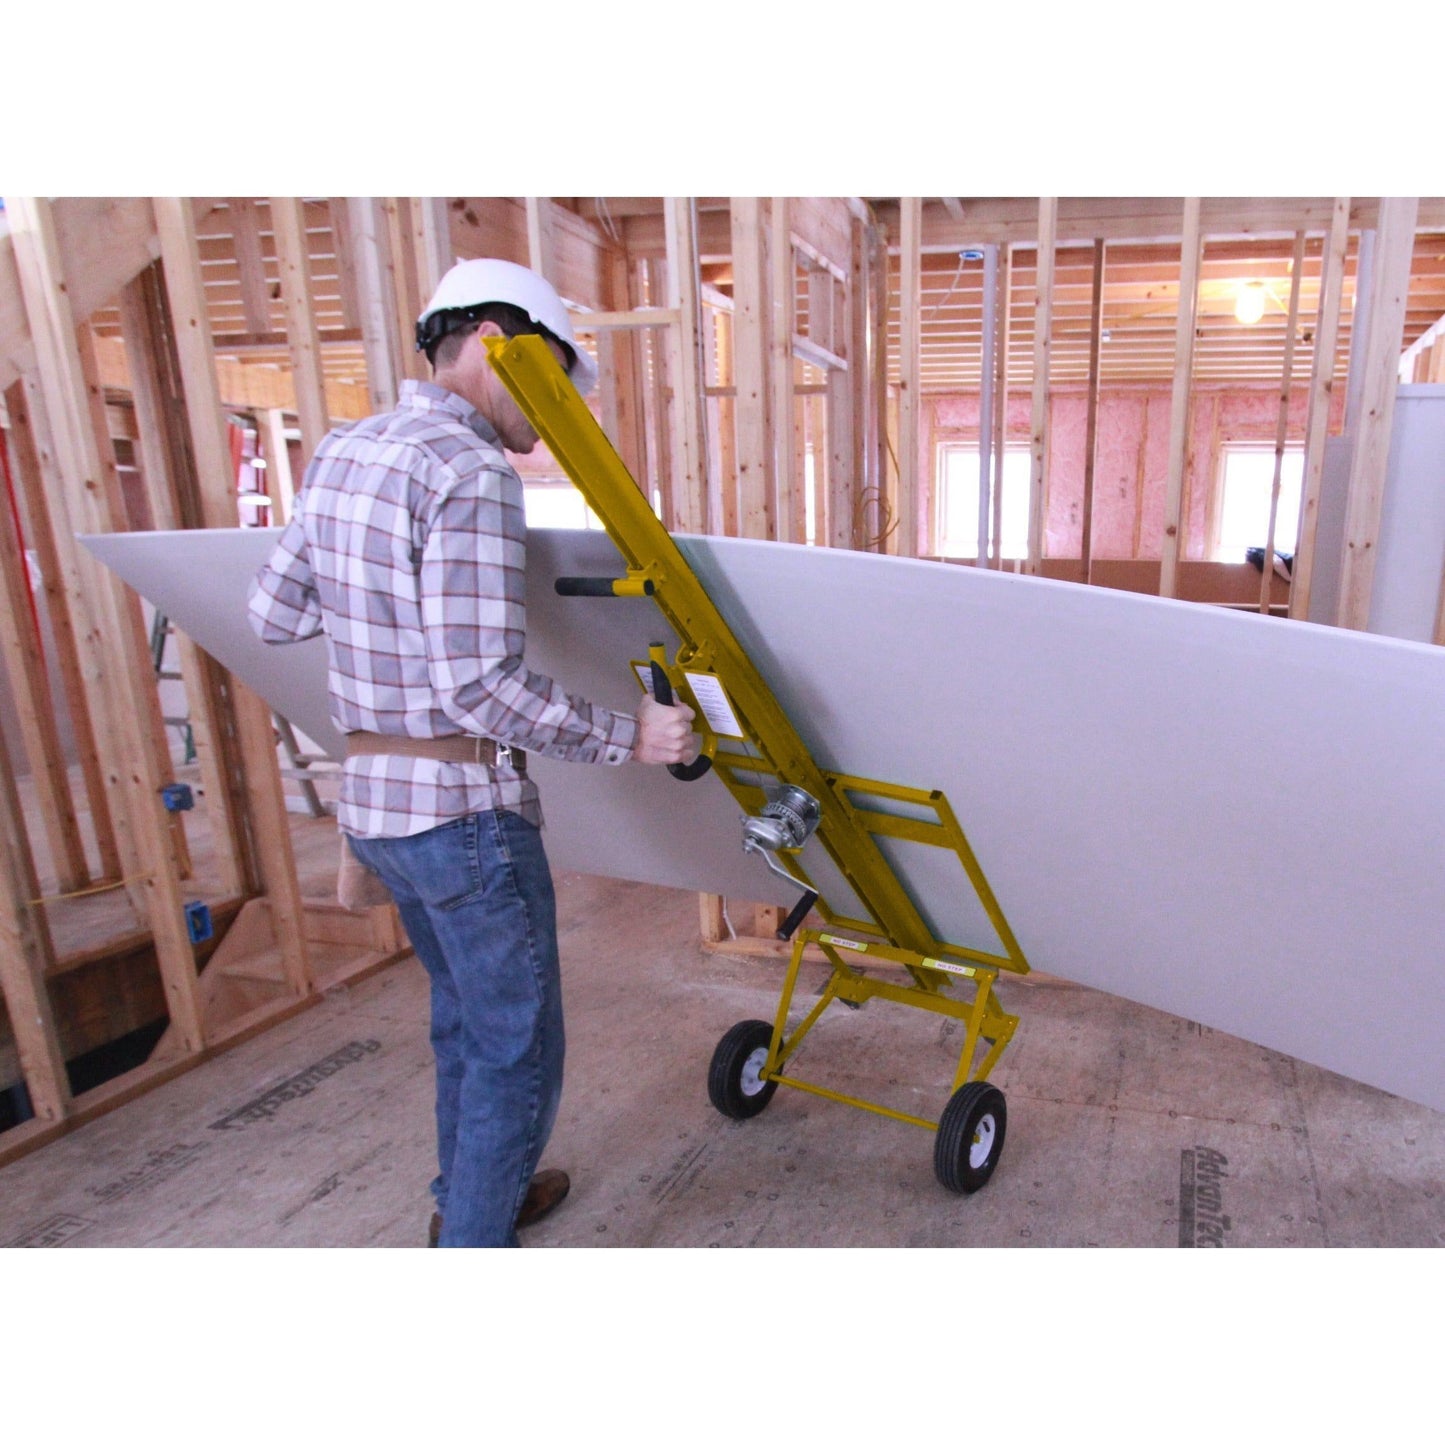 Panellift® Hangpro Drywall Lift for Walls Model 100 - Paragon Pro Manufacturing Solutions Inc.